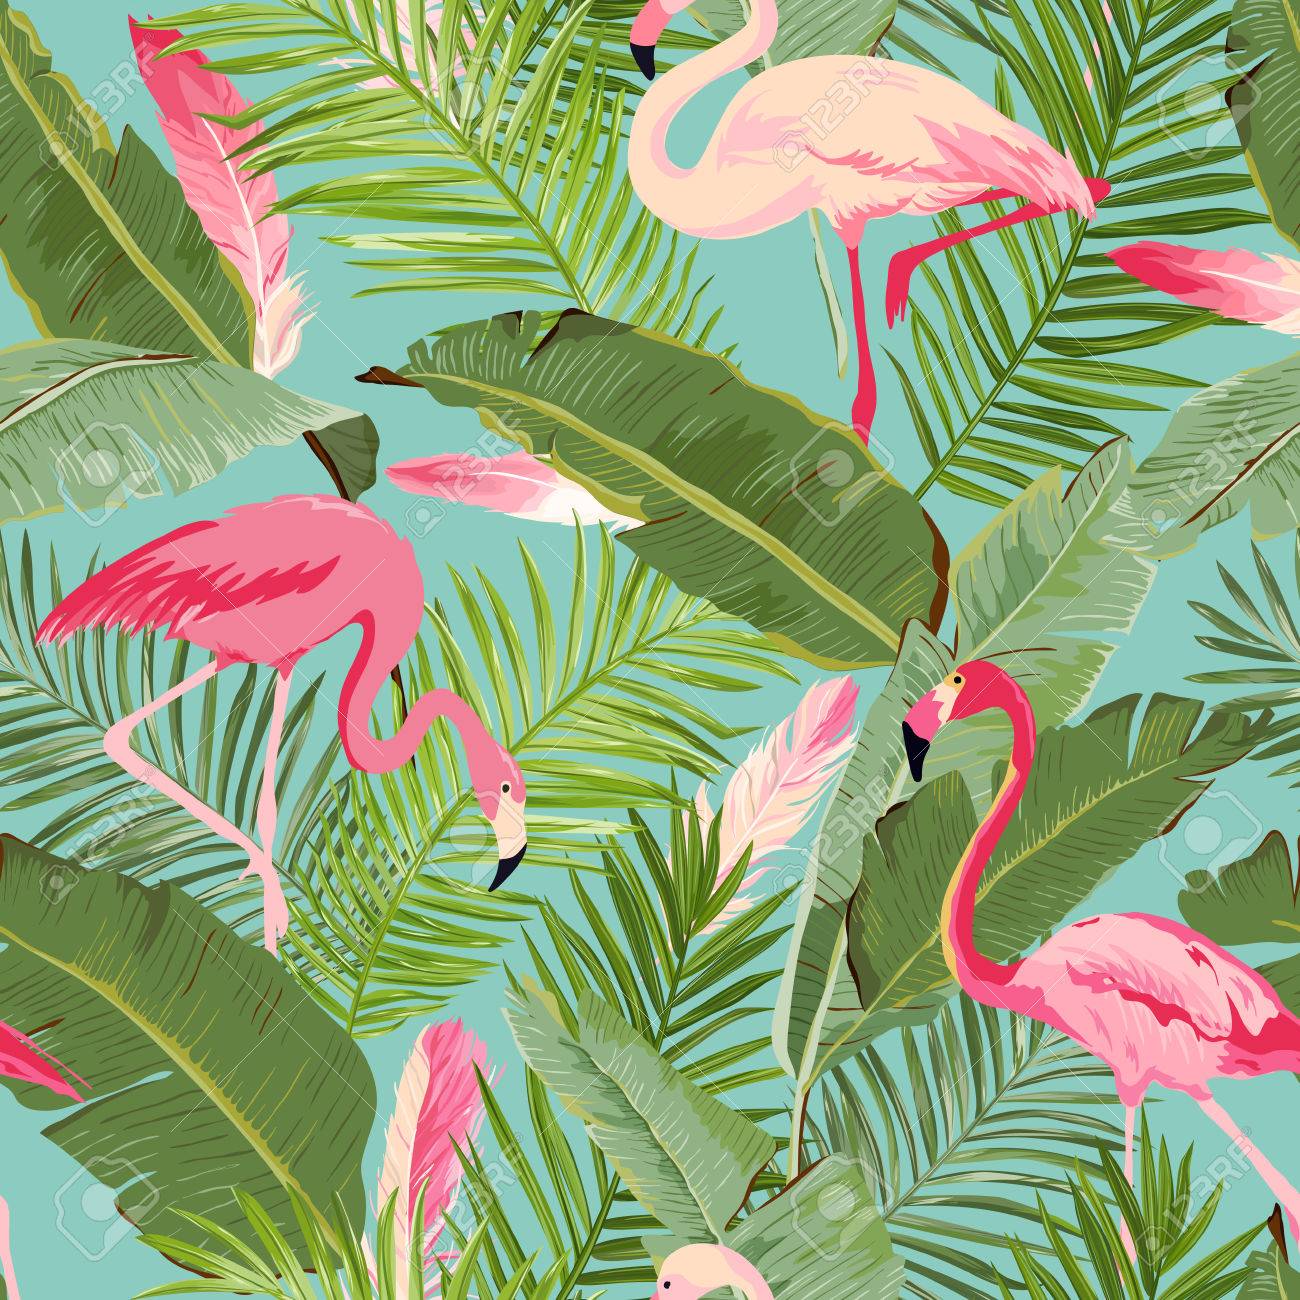 Free download Tropical Seamless Vector Flamingo And Floral Summer